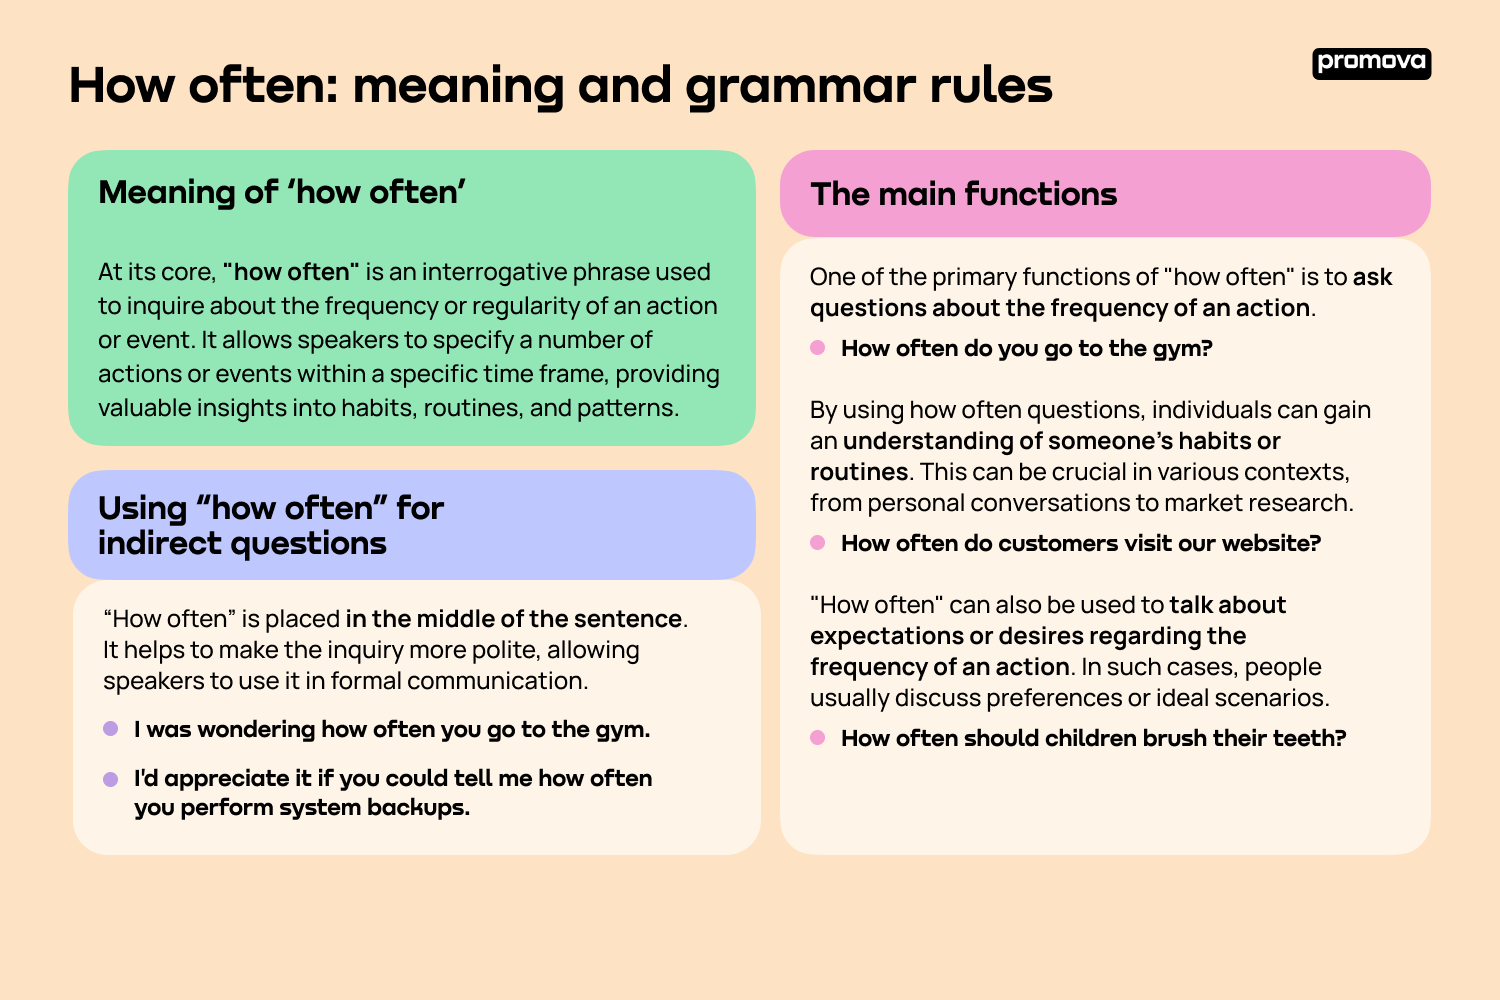 Discovering Grammar Rules for 'How Often'